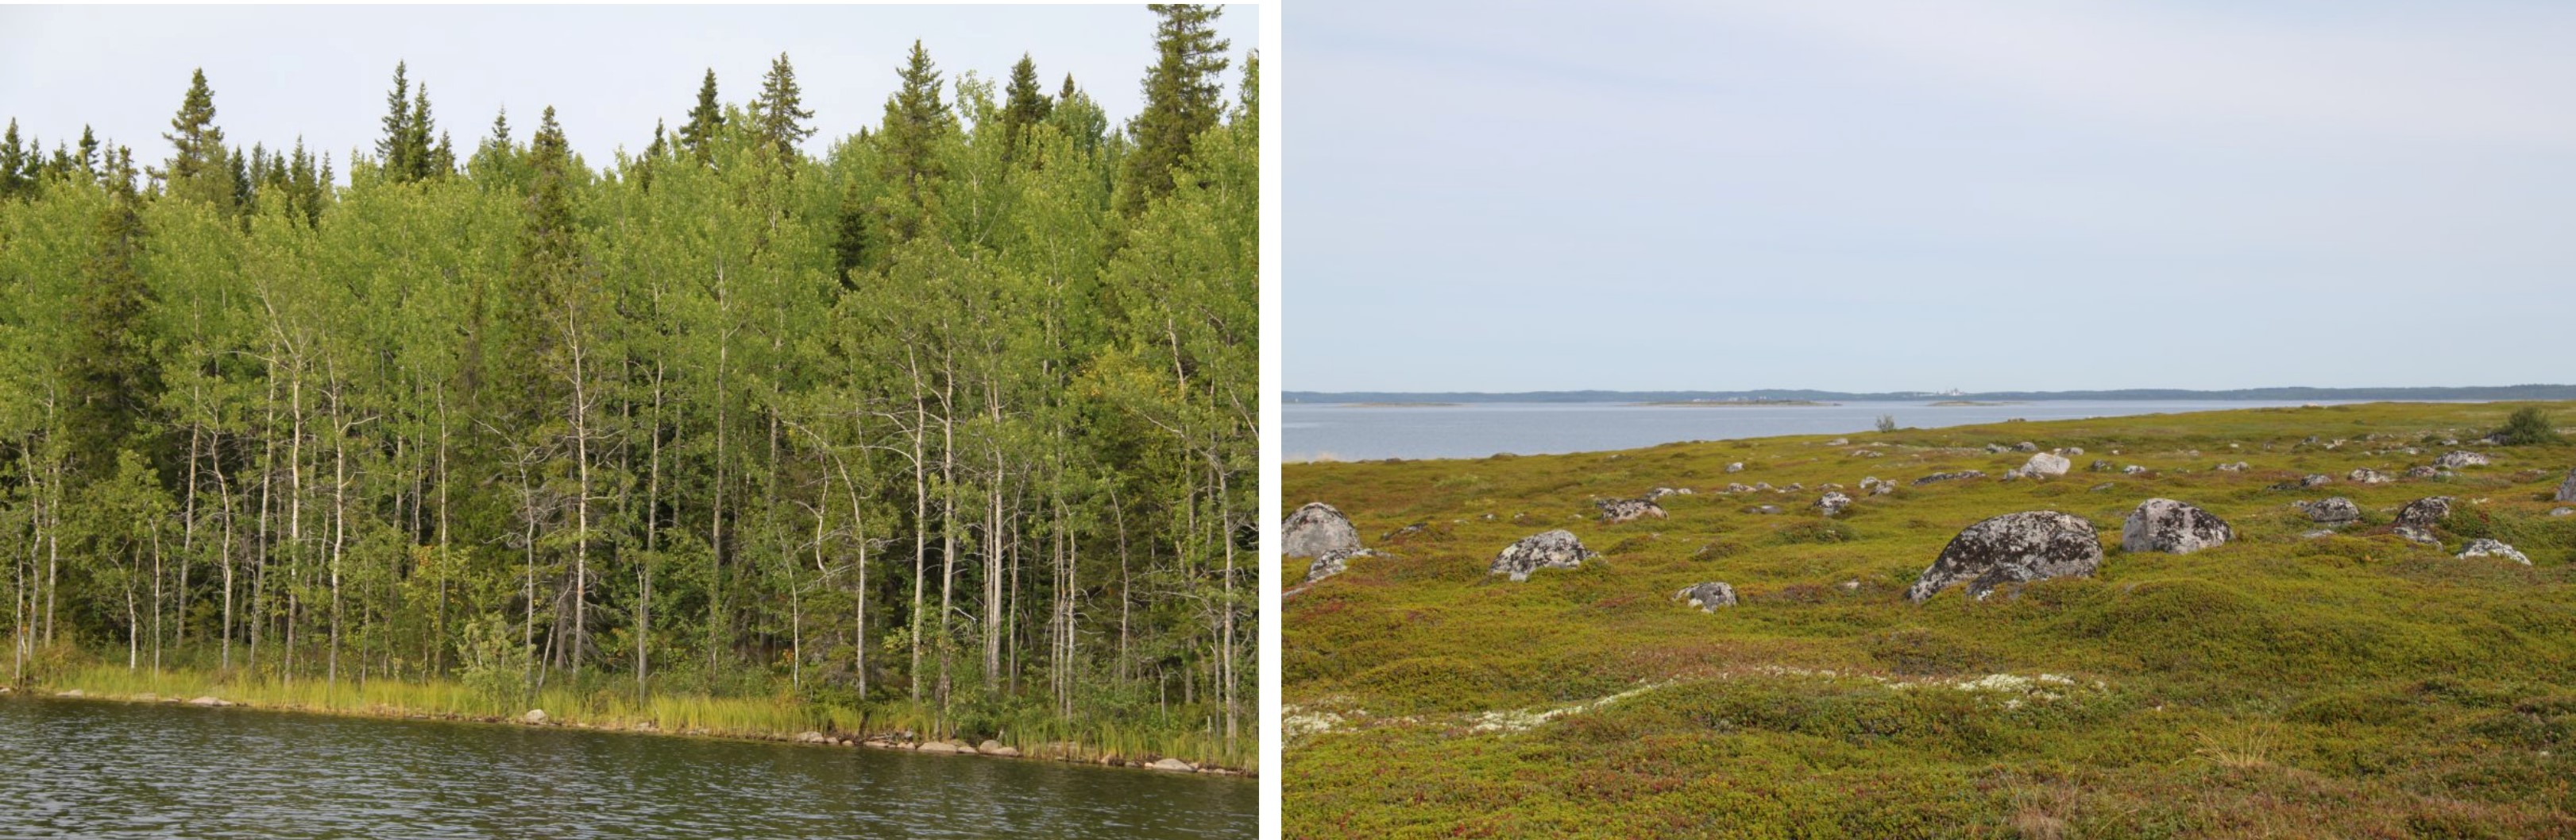 On the left, the forest on Solovki. On the right, the tundra-like landscape of Big Zayatskii Island.